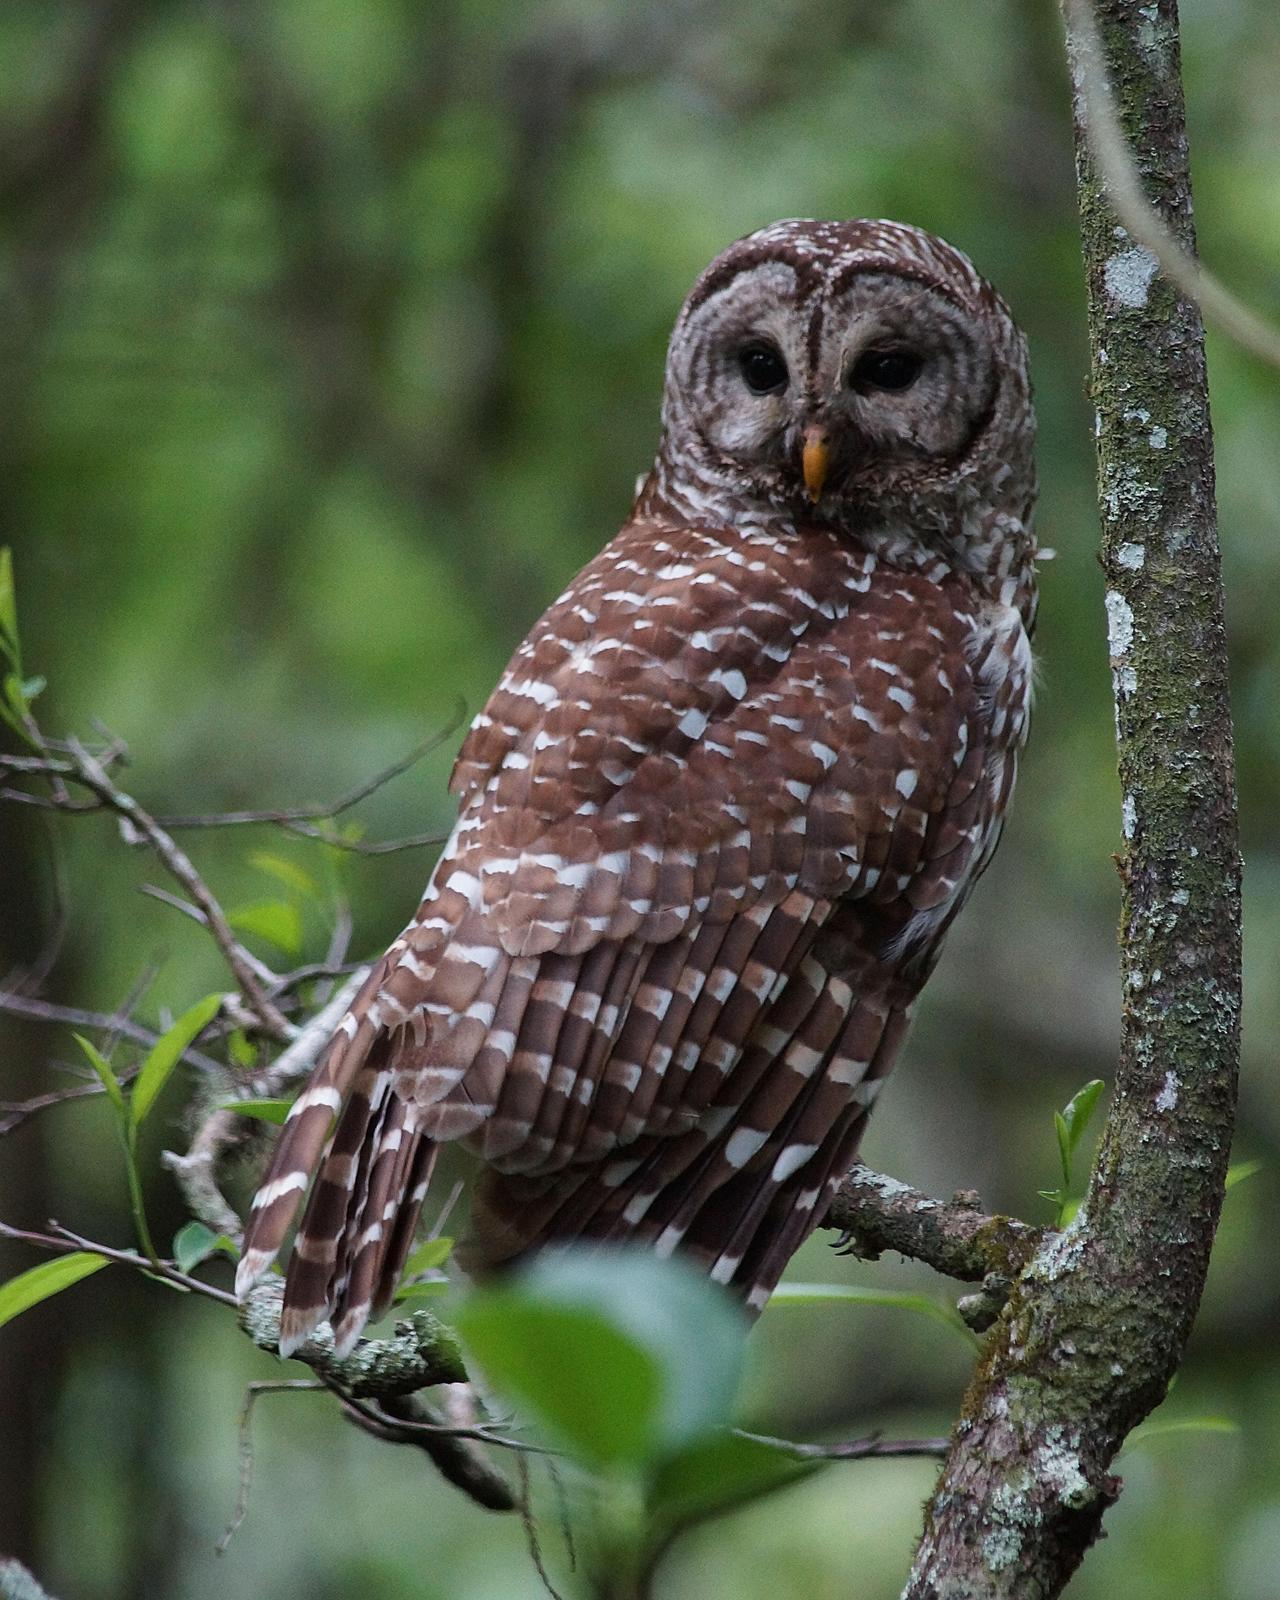 Barred Owl Photo by Steve Percival